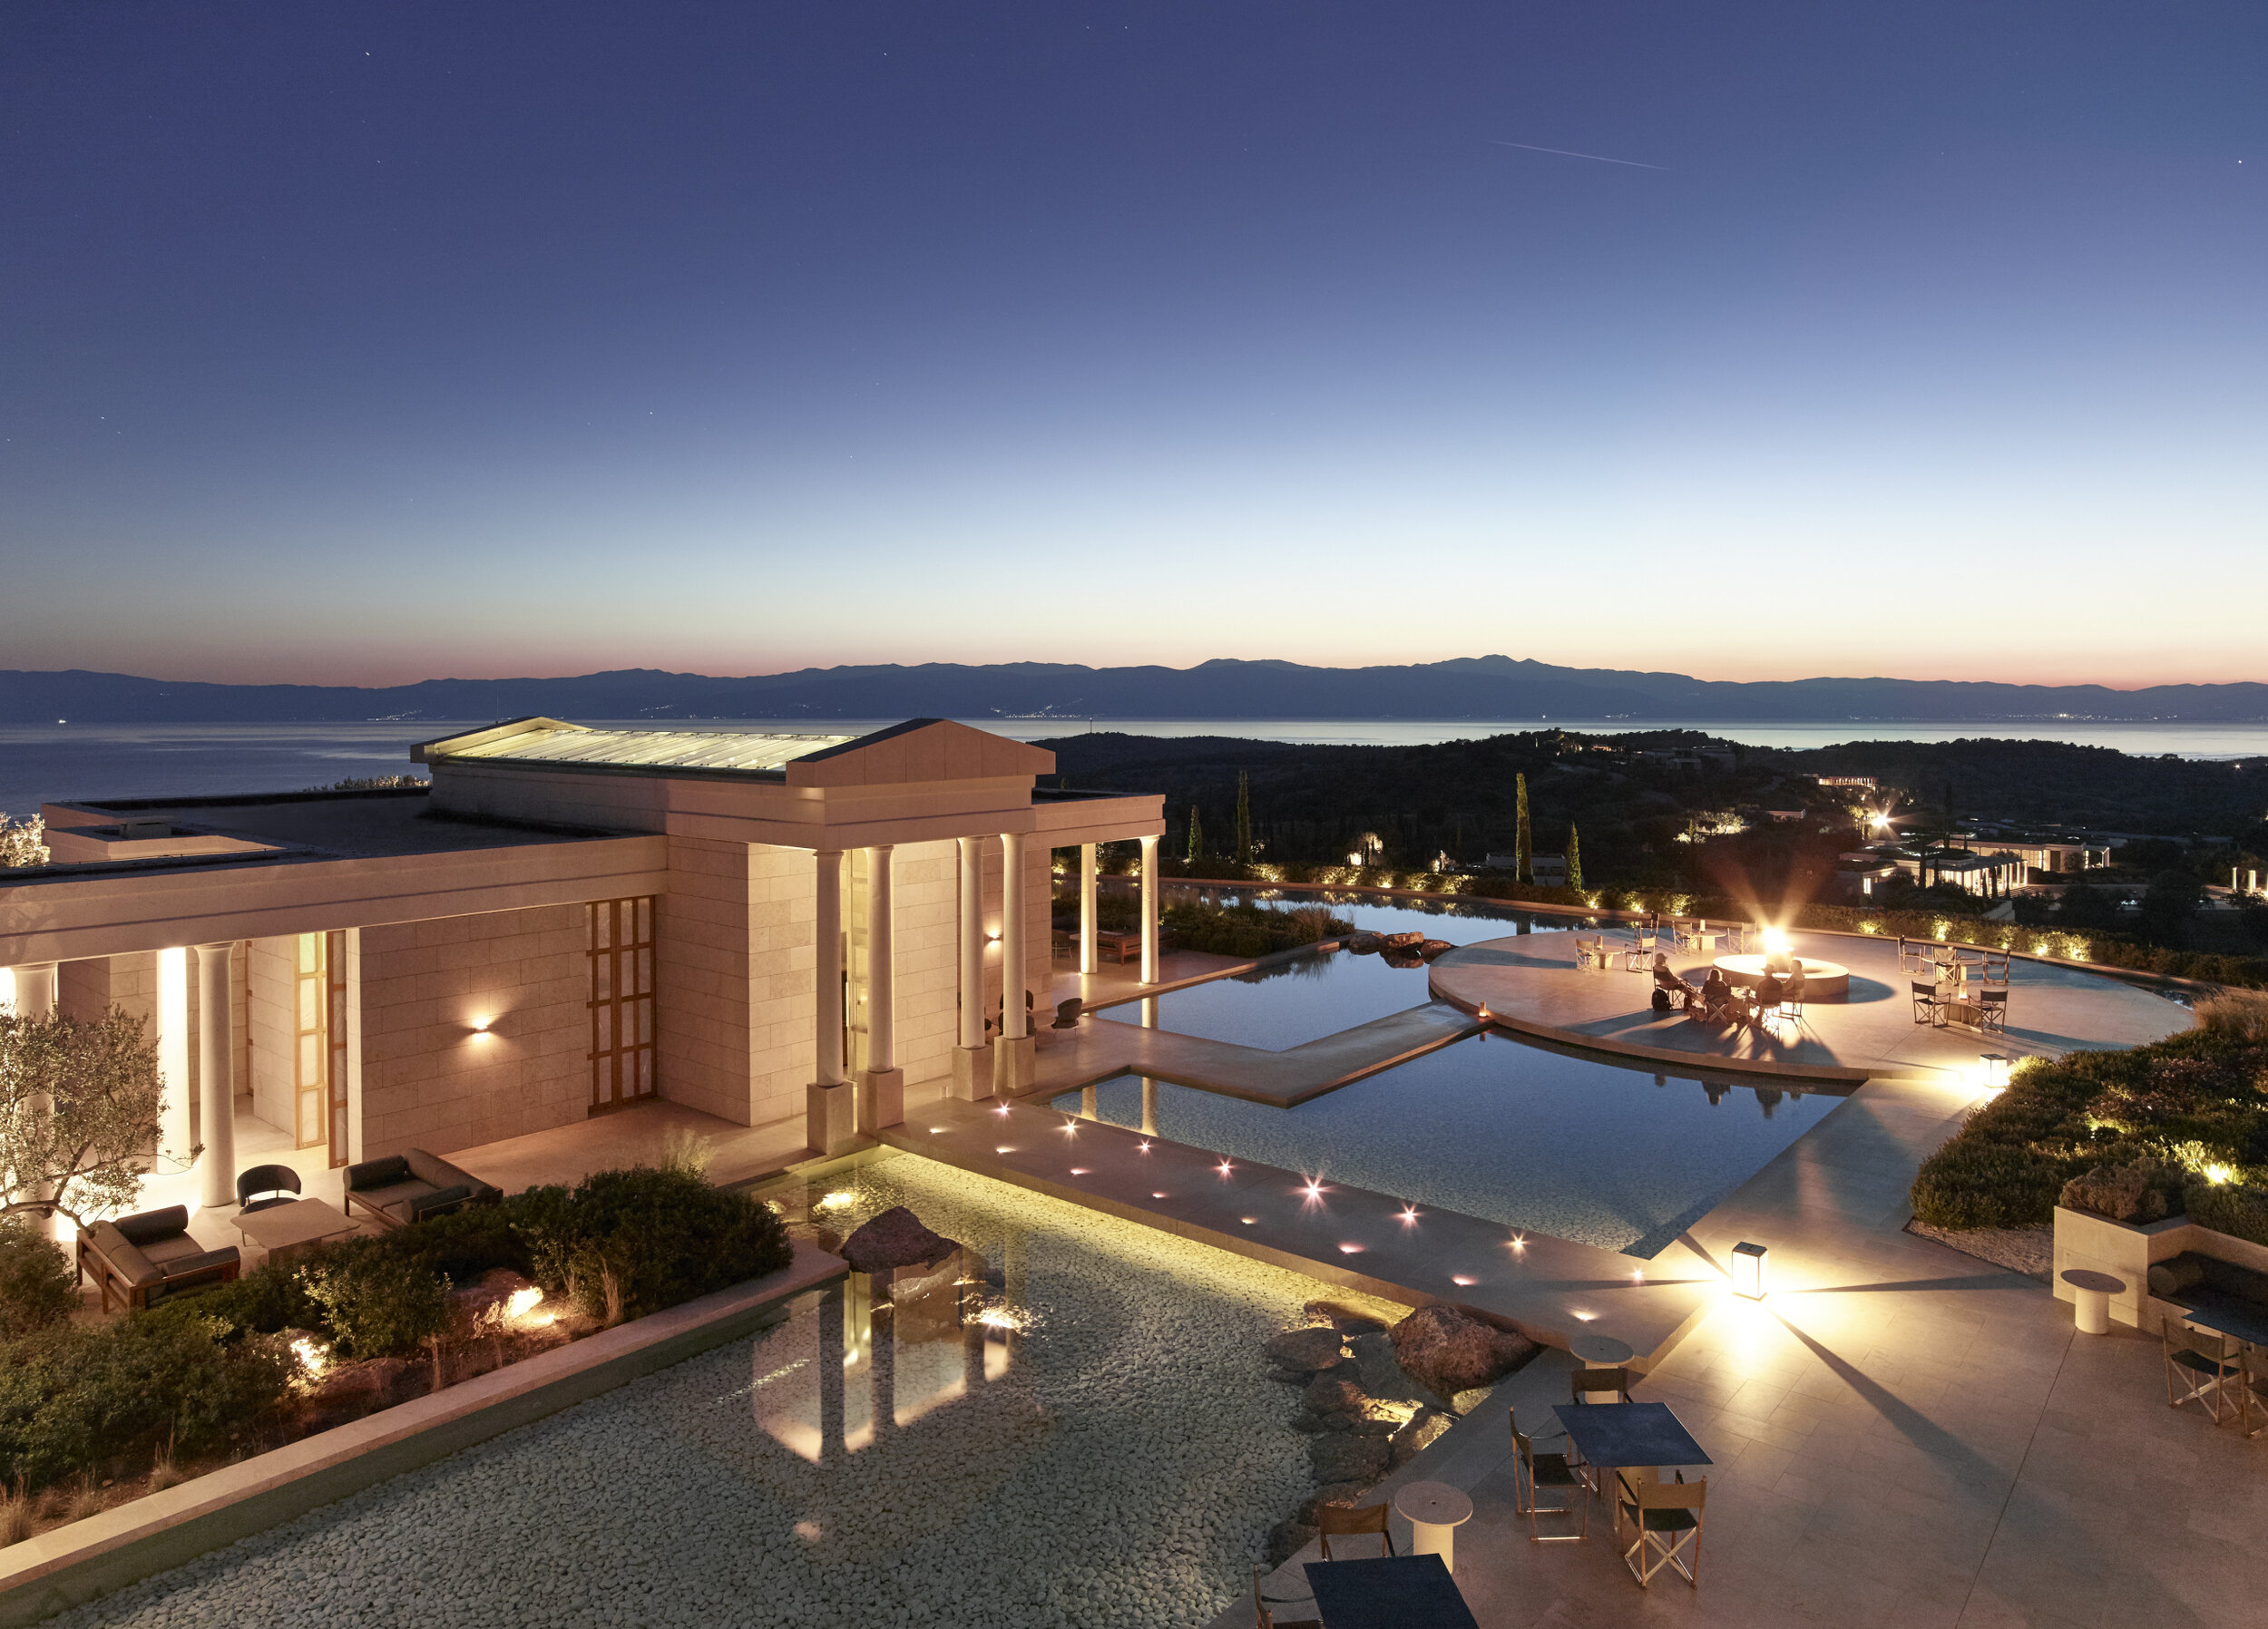 Amanzoe, Greece - Bar, Fire pit, View, Sunset, Aerial_High Res_16245.jpg